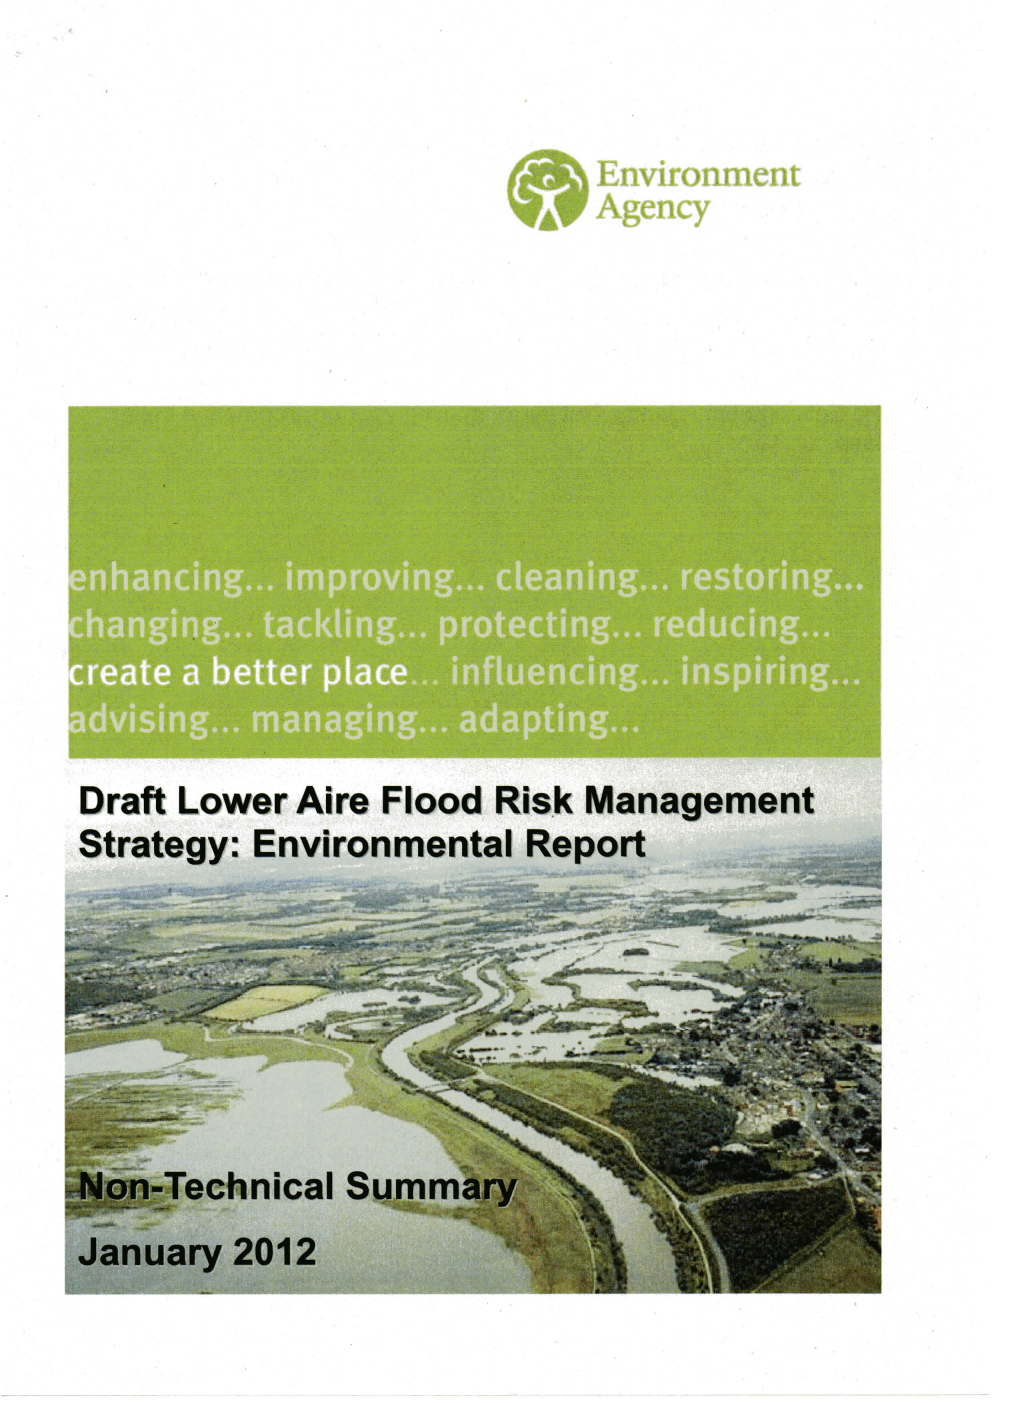 Draft Lower Aire Flood Risk Management Strategy: Environmental Report S